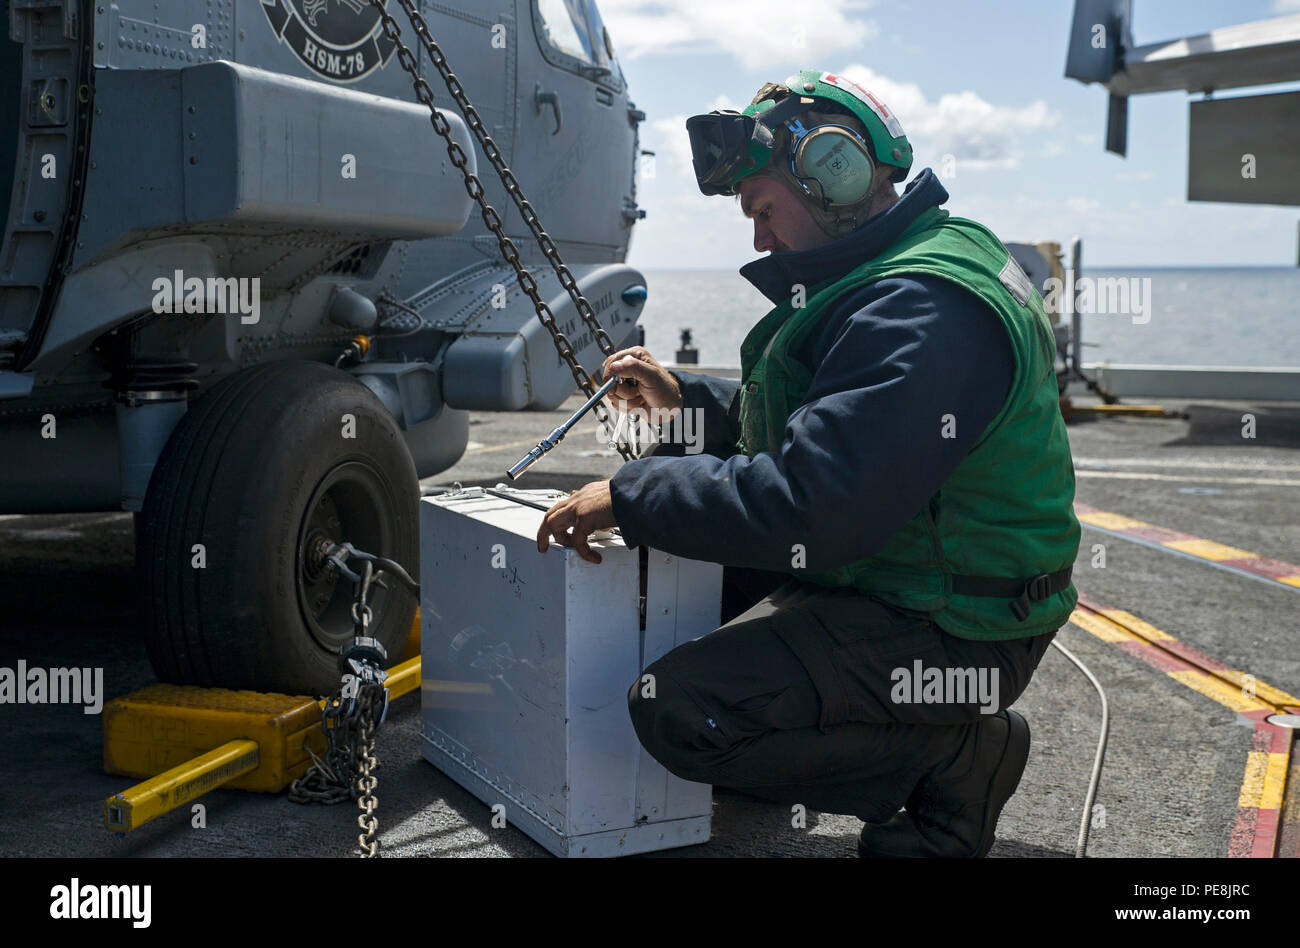 151030-N-EH855-003 PACIFIC OCEAN (Oct. 30, 2015) Aviation Machinist's Mate 2nd Class Max Hofstetter removes tools from a toolbox on the flight deck of aircraft carrier USS George Washington (CVN 73). Washington is deployed as a part of Southern Seas 2015. The eighth deployment of its kind, Southern Seas 2015 seeks to enhance interoperability, increase regional stability, and build and maintain regional relationships with countries throughout the region through joint multinational and interagency exchanges and cooperation. (U.S. Navy photo by Mass Communication Specialist 3rd Class Bryan Mai/Re Stock Photo